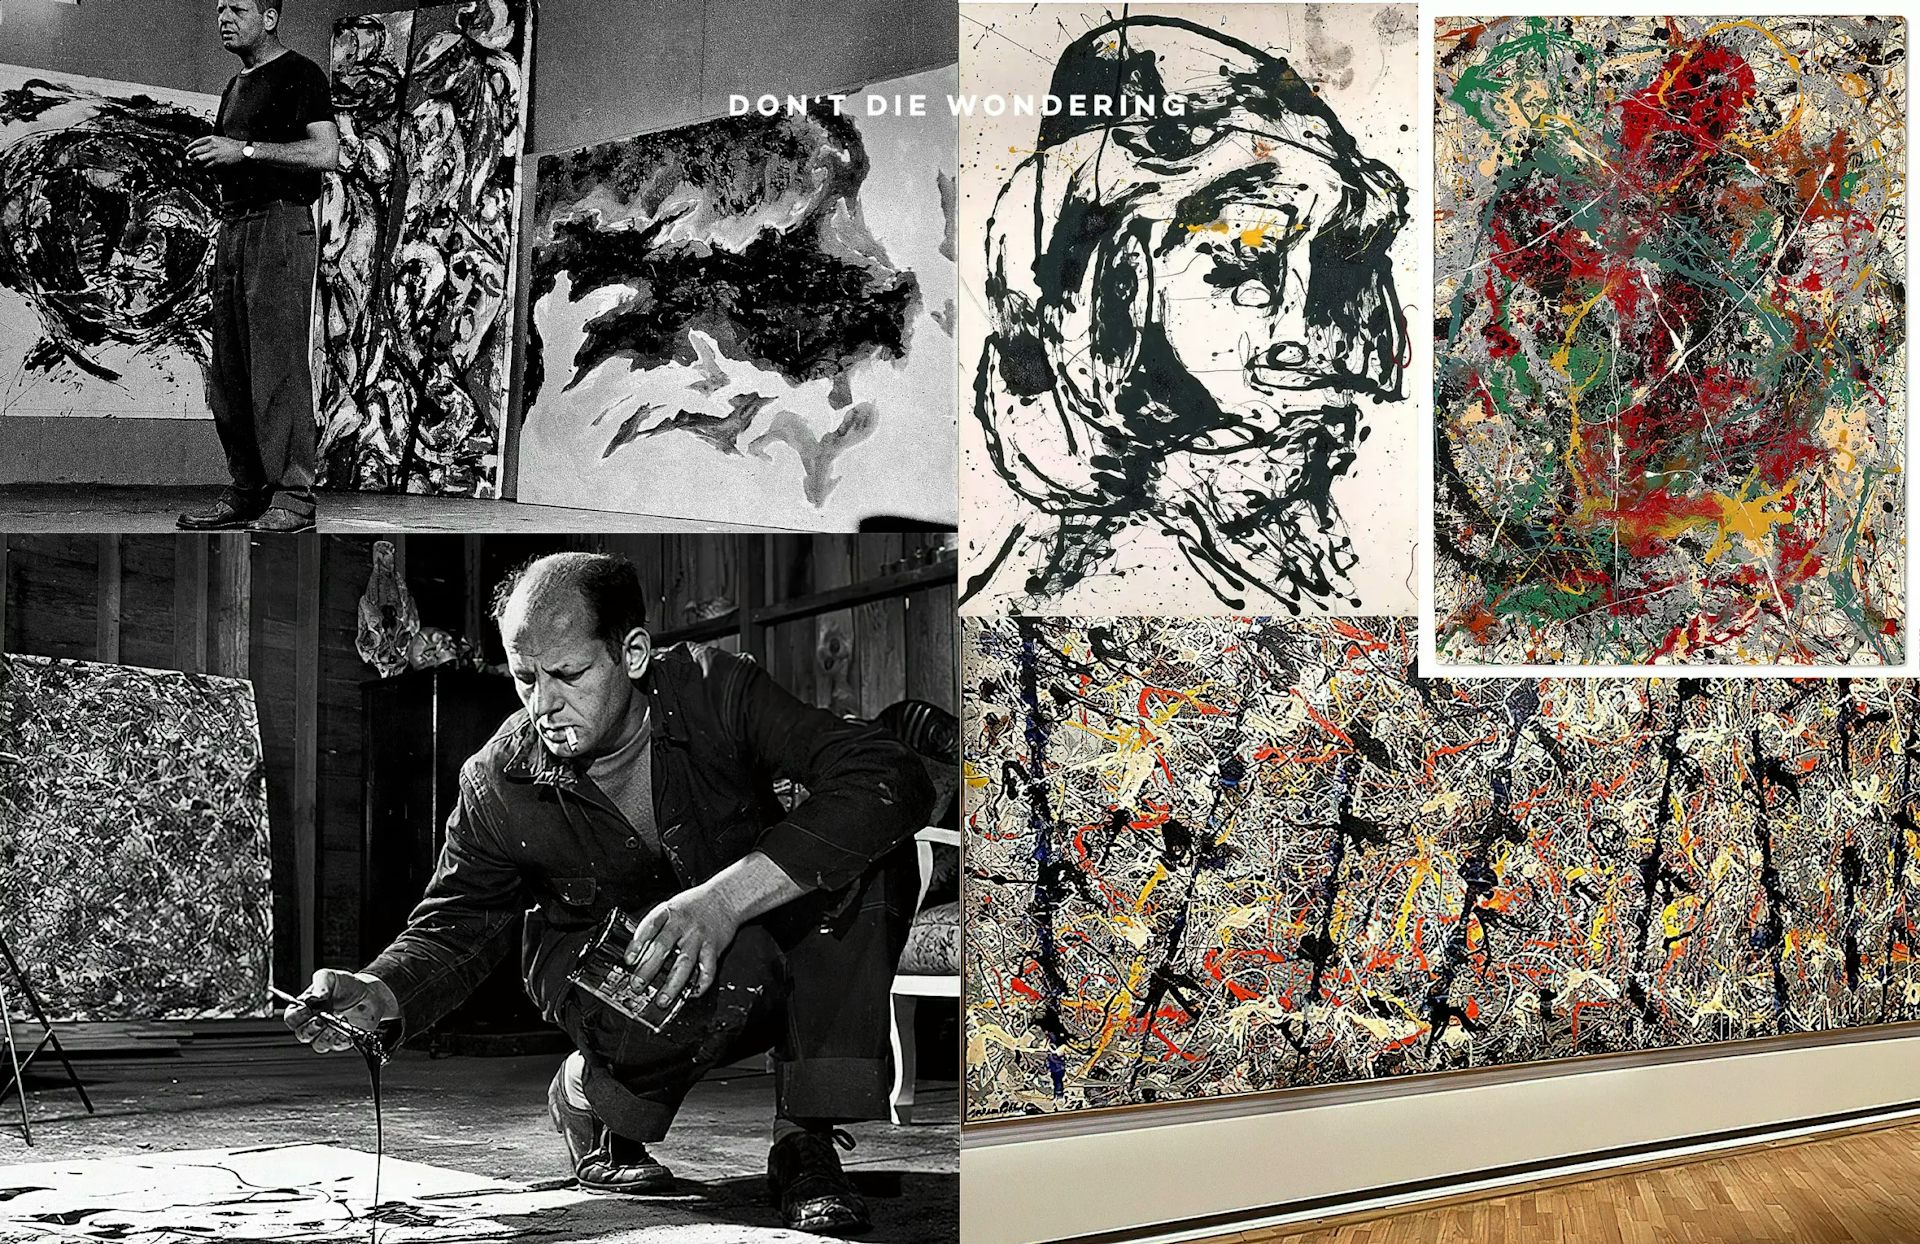 Jackson Pollock | Number 31 Is Under The Hammer For A Worldly Price